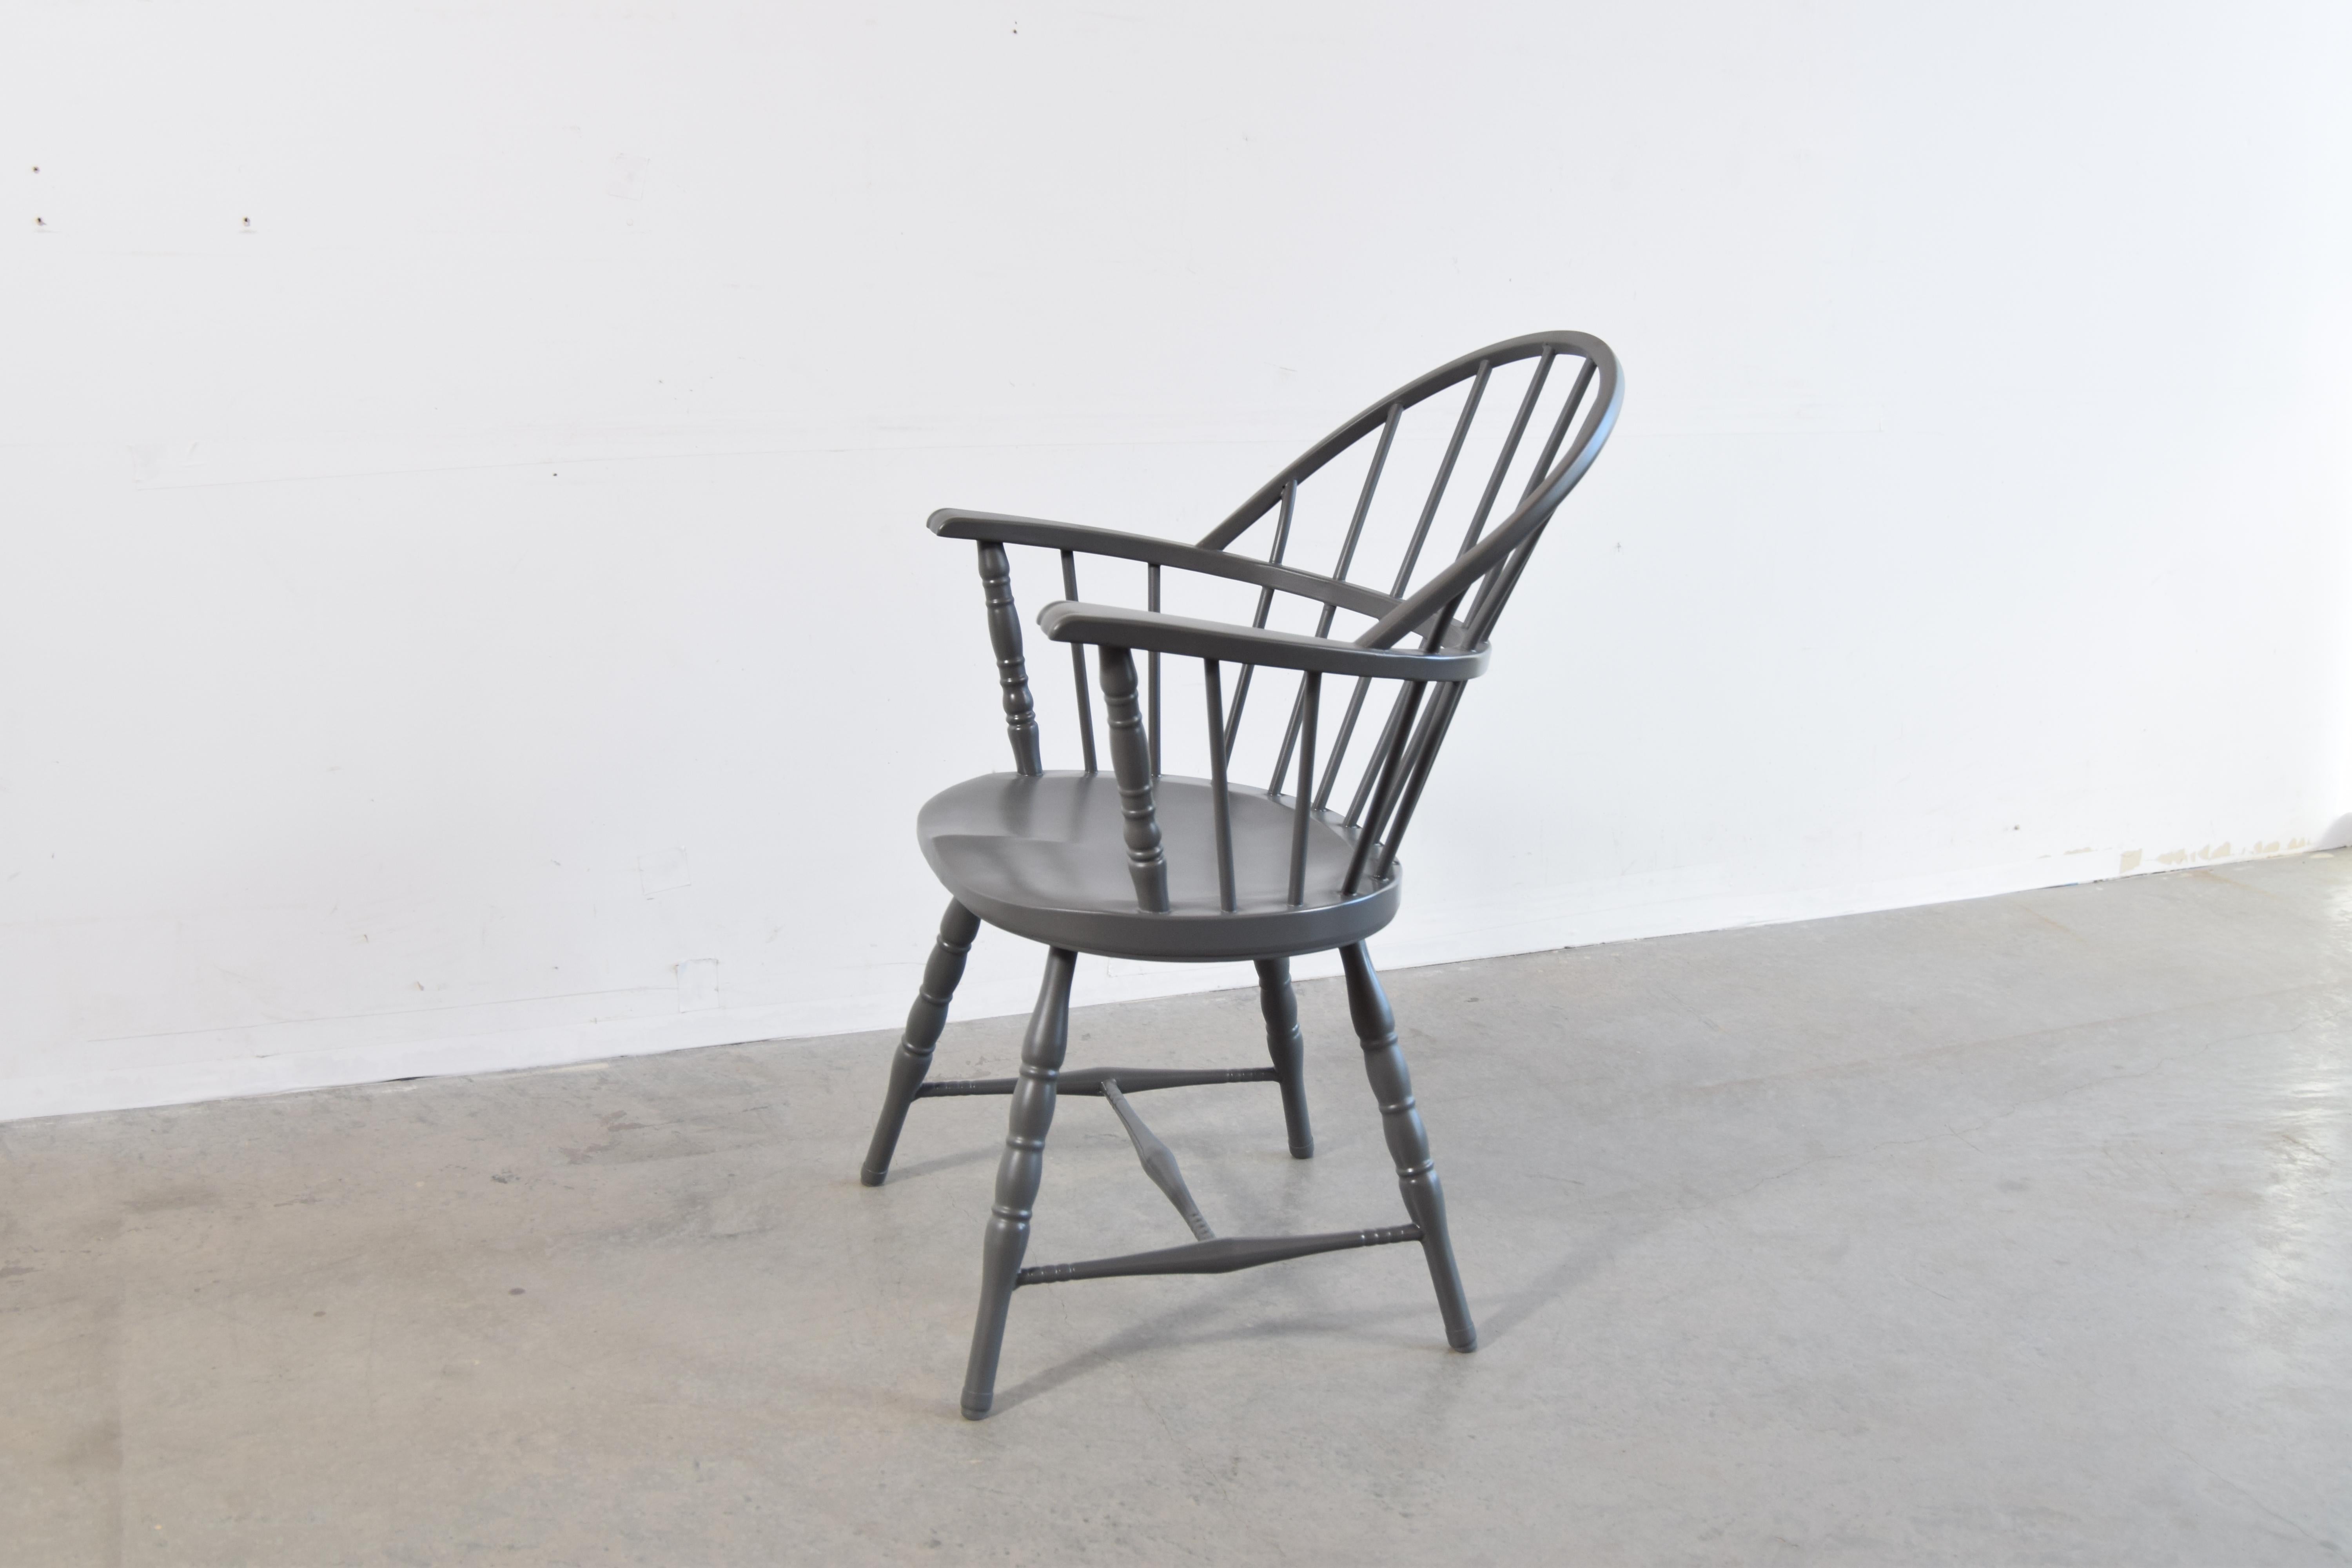 Steel Windsor Chair For Sale 3